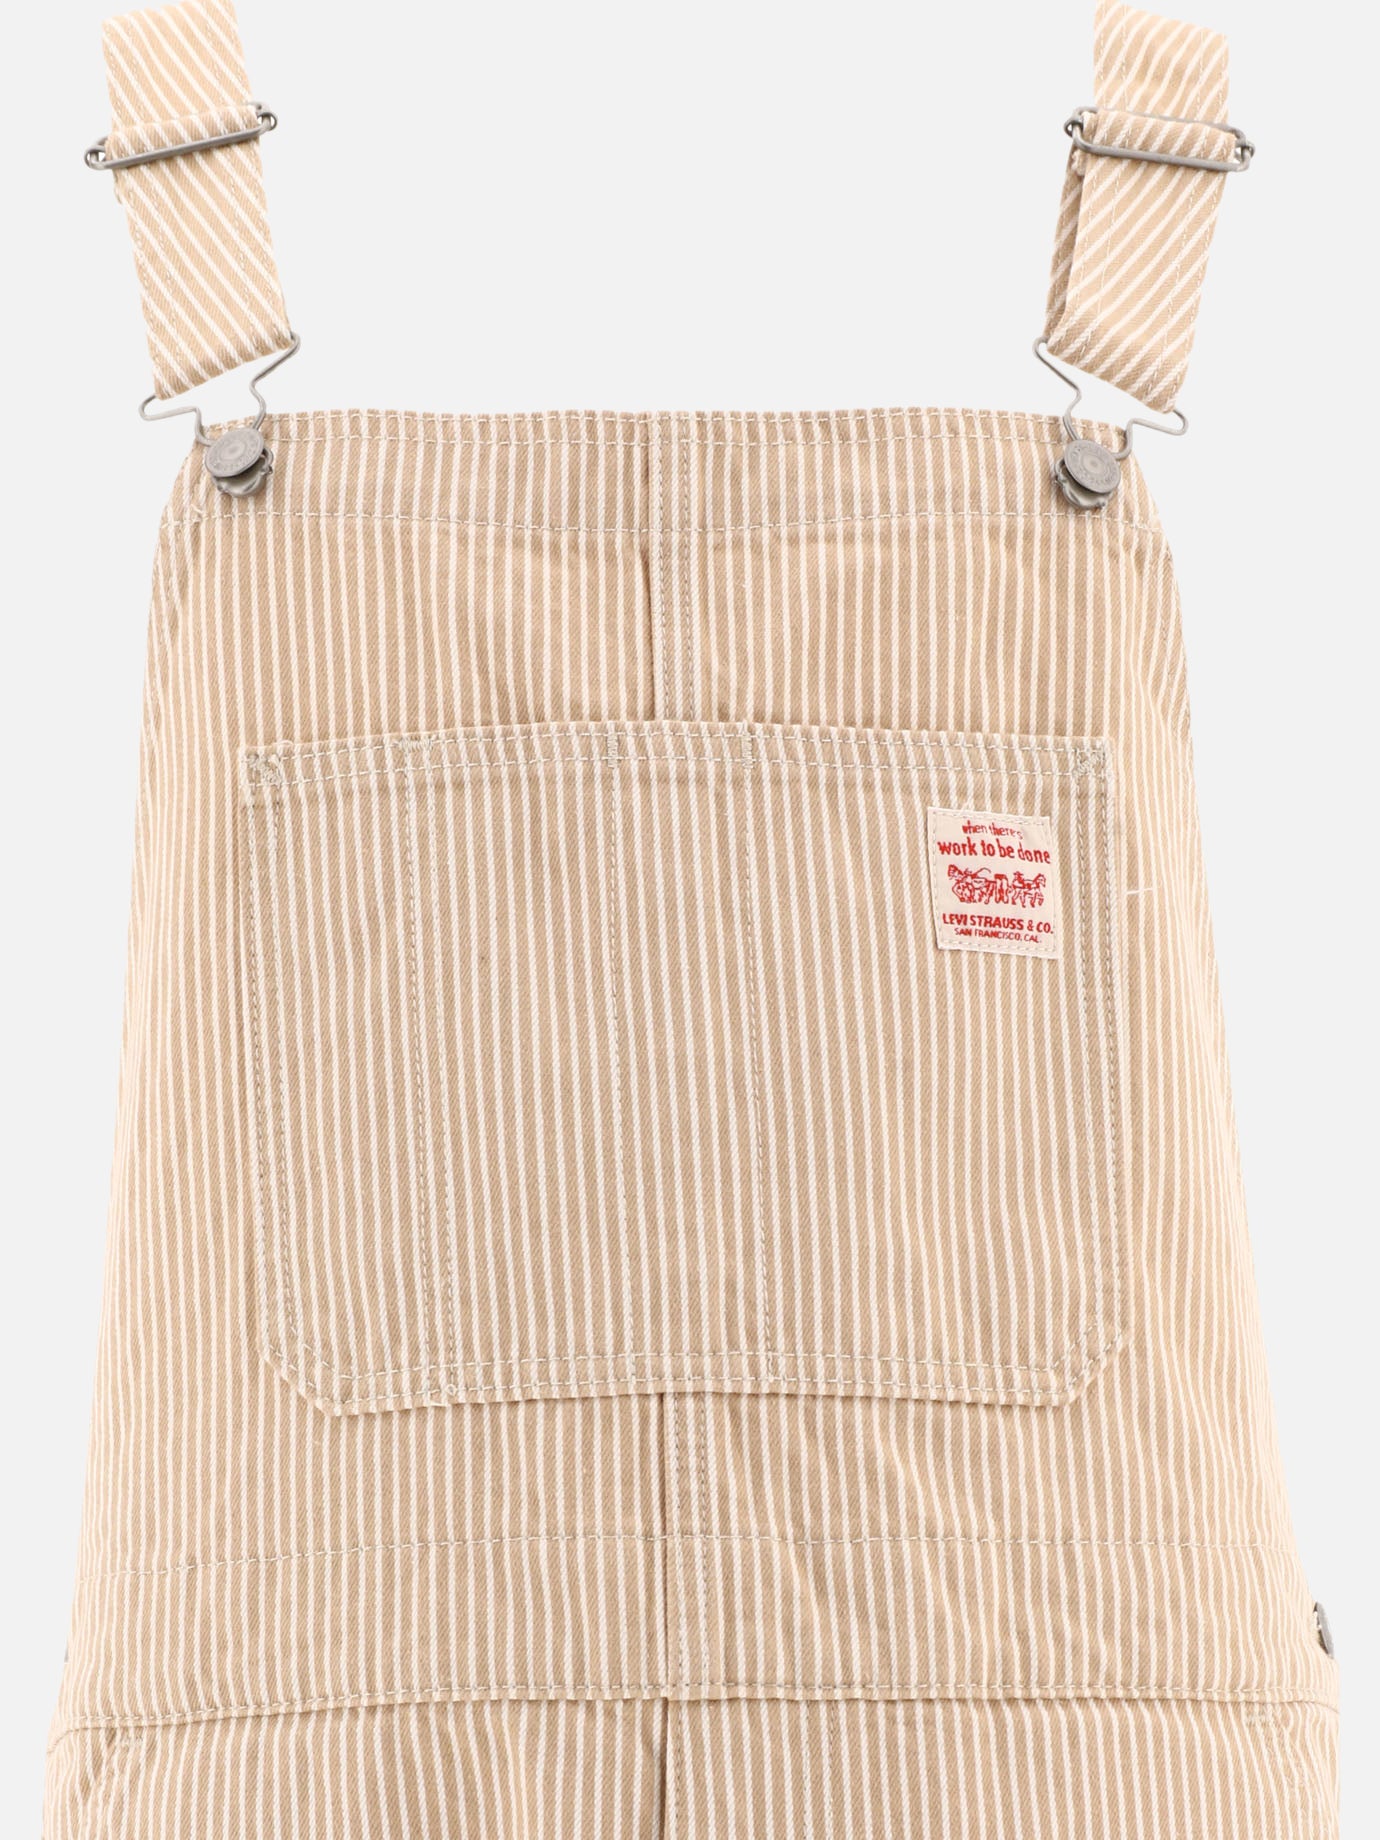 "Levi's® Red tab™" overalls